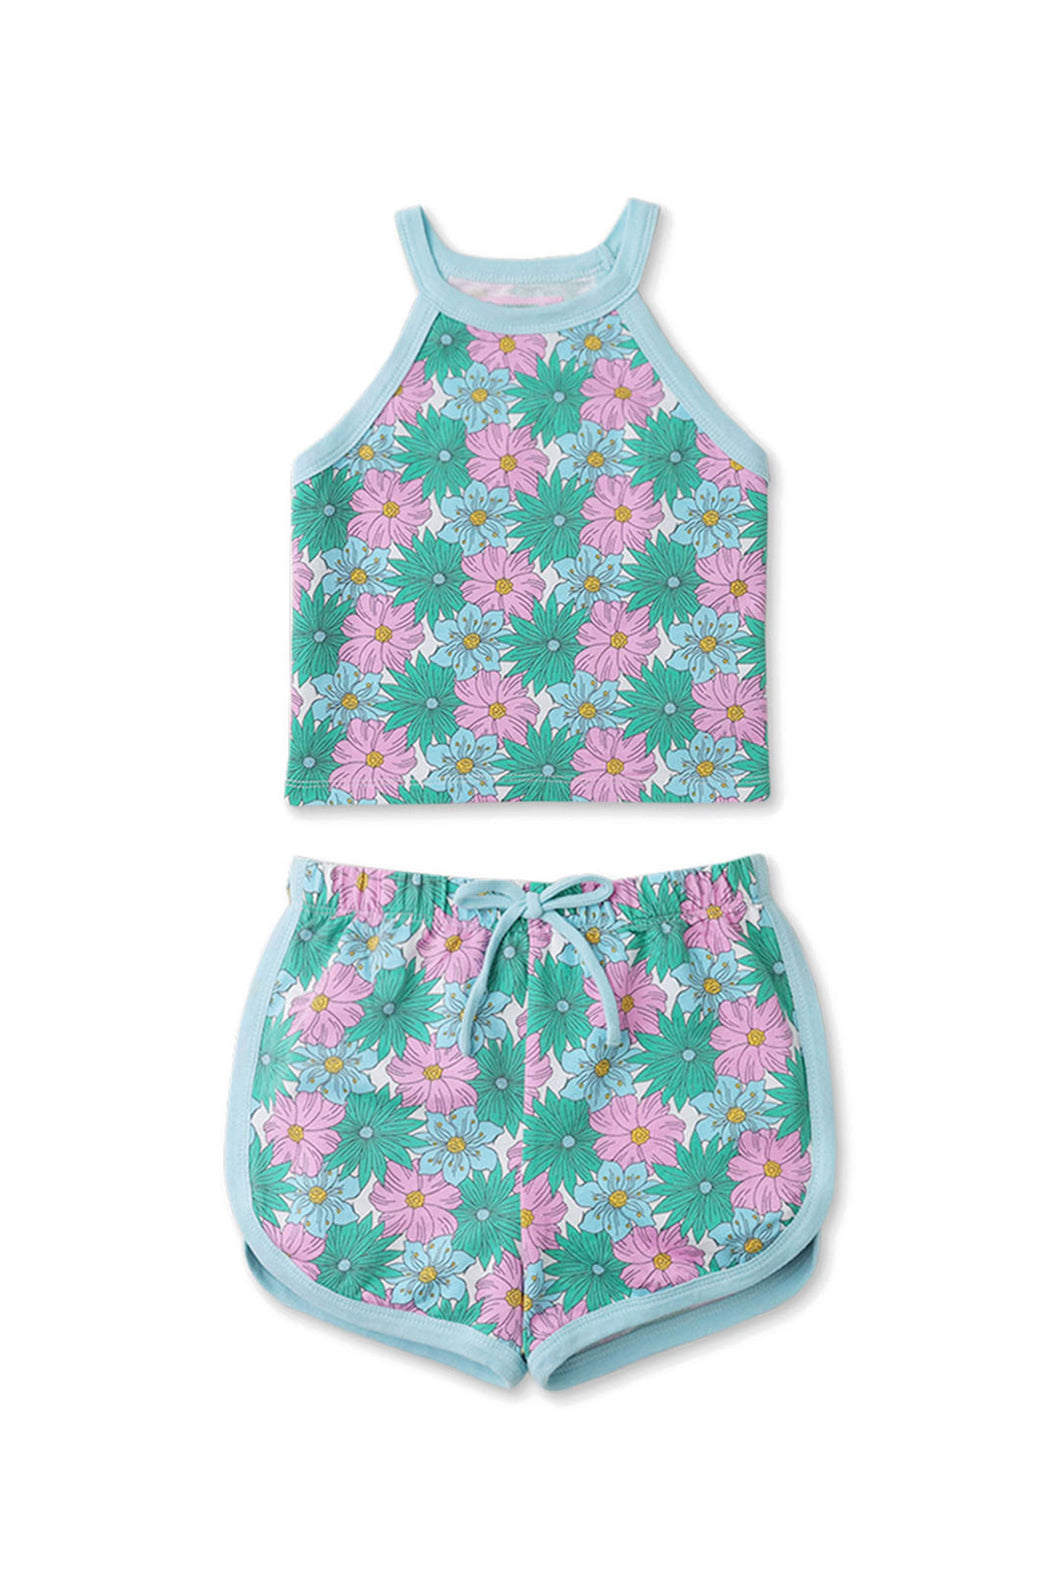 Gingersnaps Flower Print Halter Top and Shorts Set